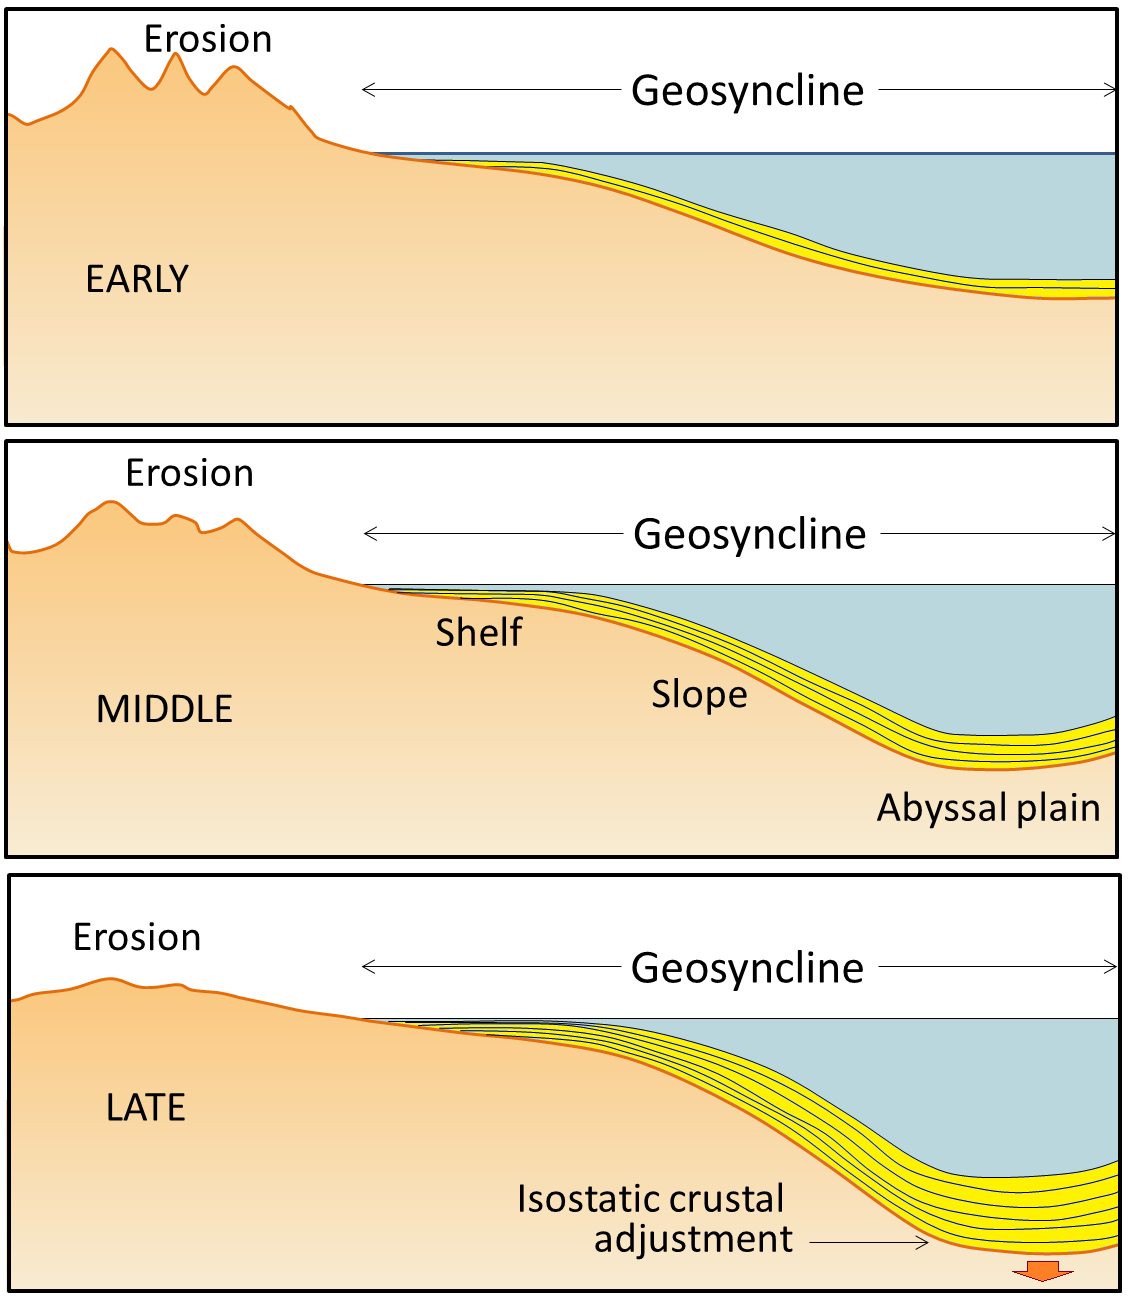 The development of a geosyncline along a continental margin. (Note that a geosyncline is not related to a syncline, which is a downward fold in rocks.) _Source: Steven Earle (2015) CC BY 4.0 [view source](https://opentextbc.ca/geology/wp-content/uploads/sites/110/2015/07/image0092.png)_